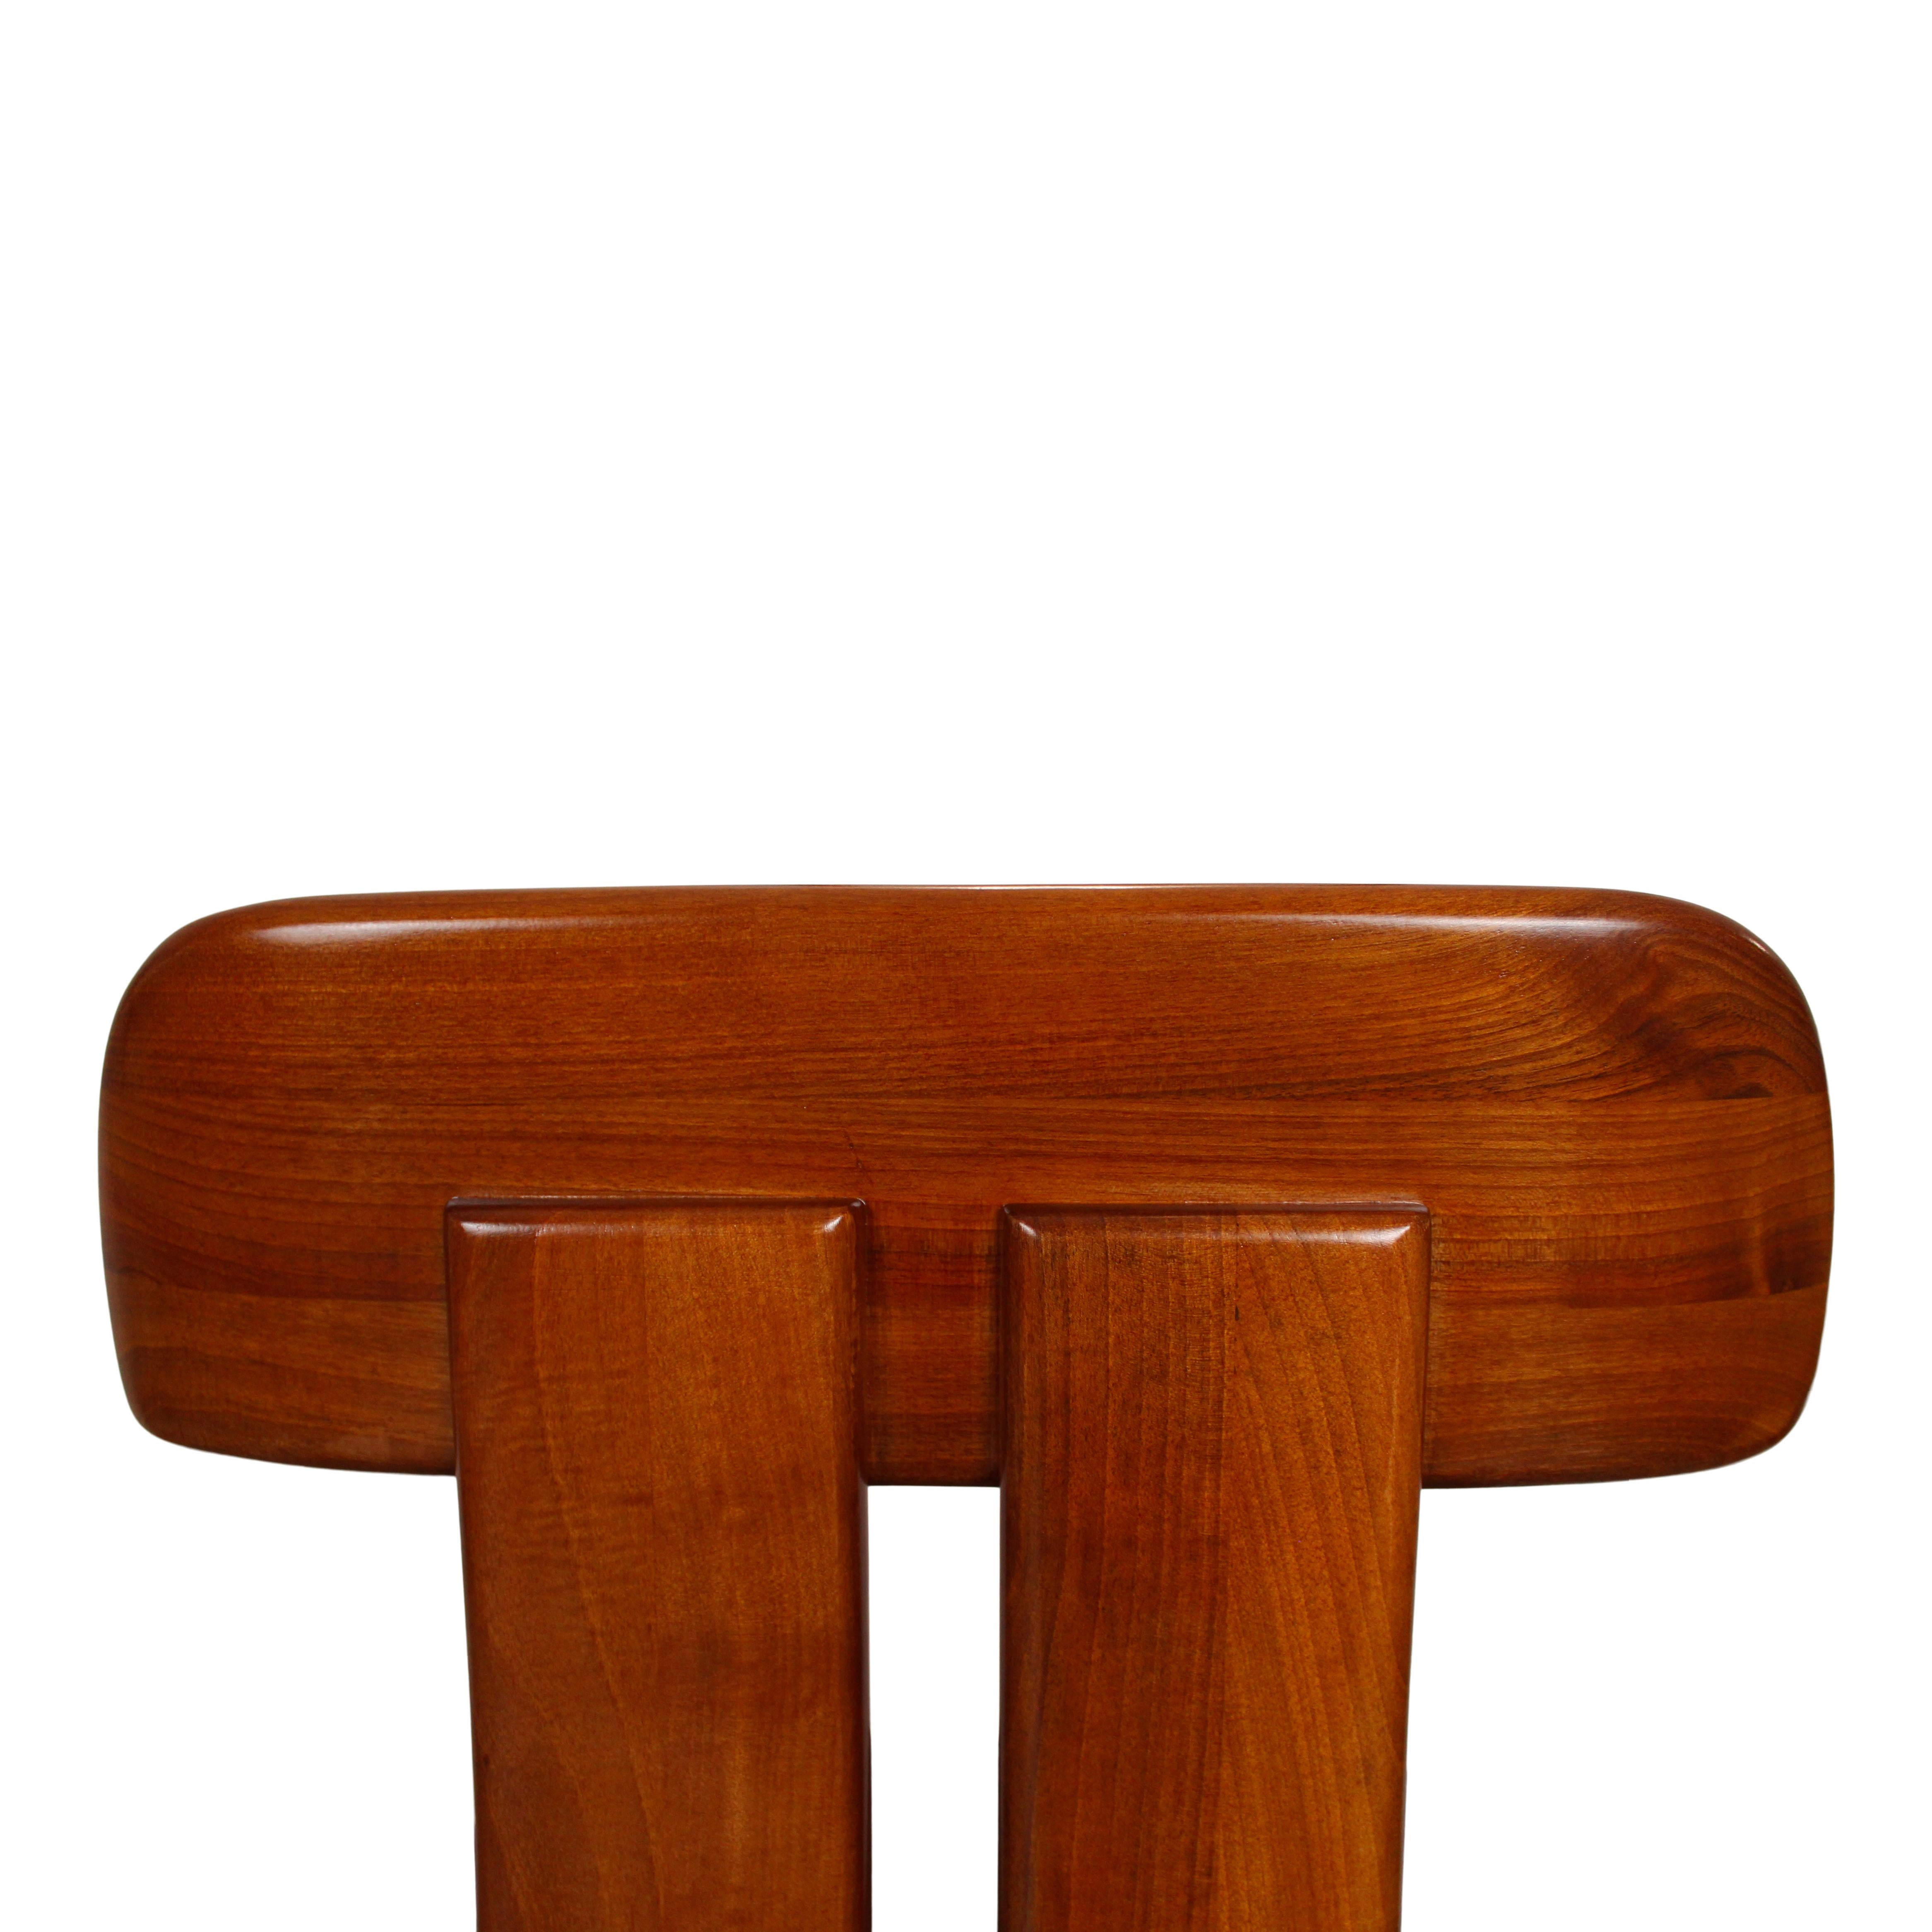 Mario Marenco Walnut Sapporo Dining Chairs for Mobilgirgi, 1970s, Set of 8 For Sale 10